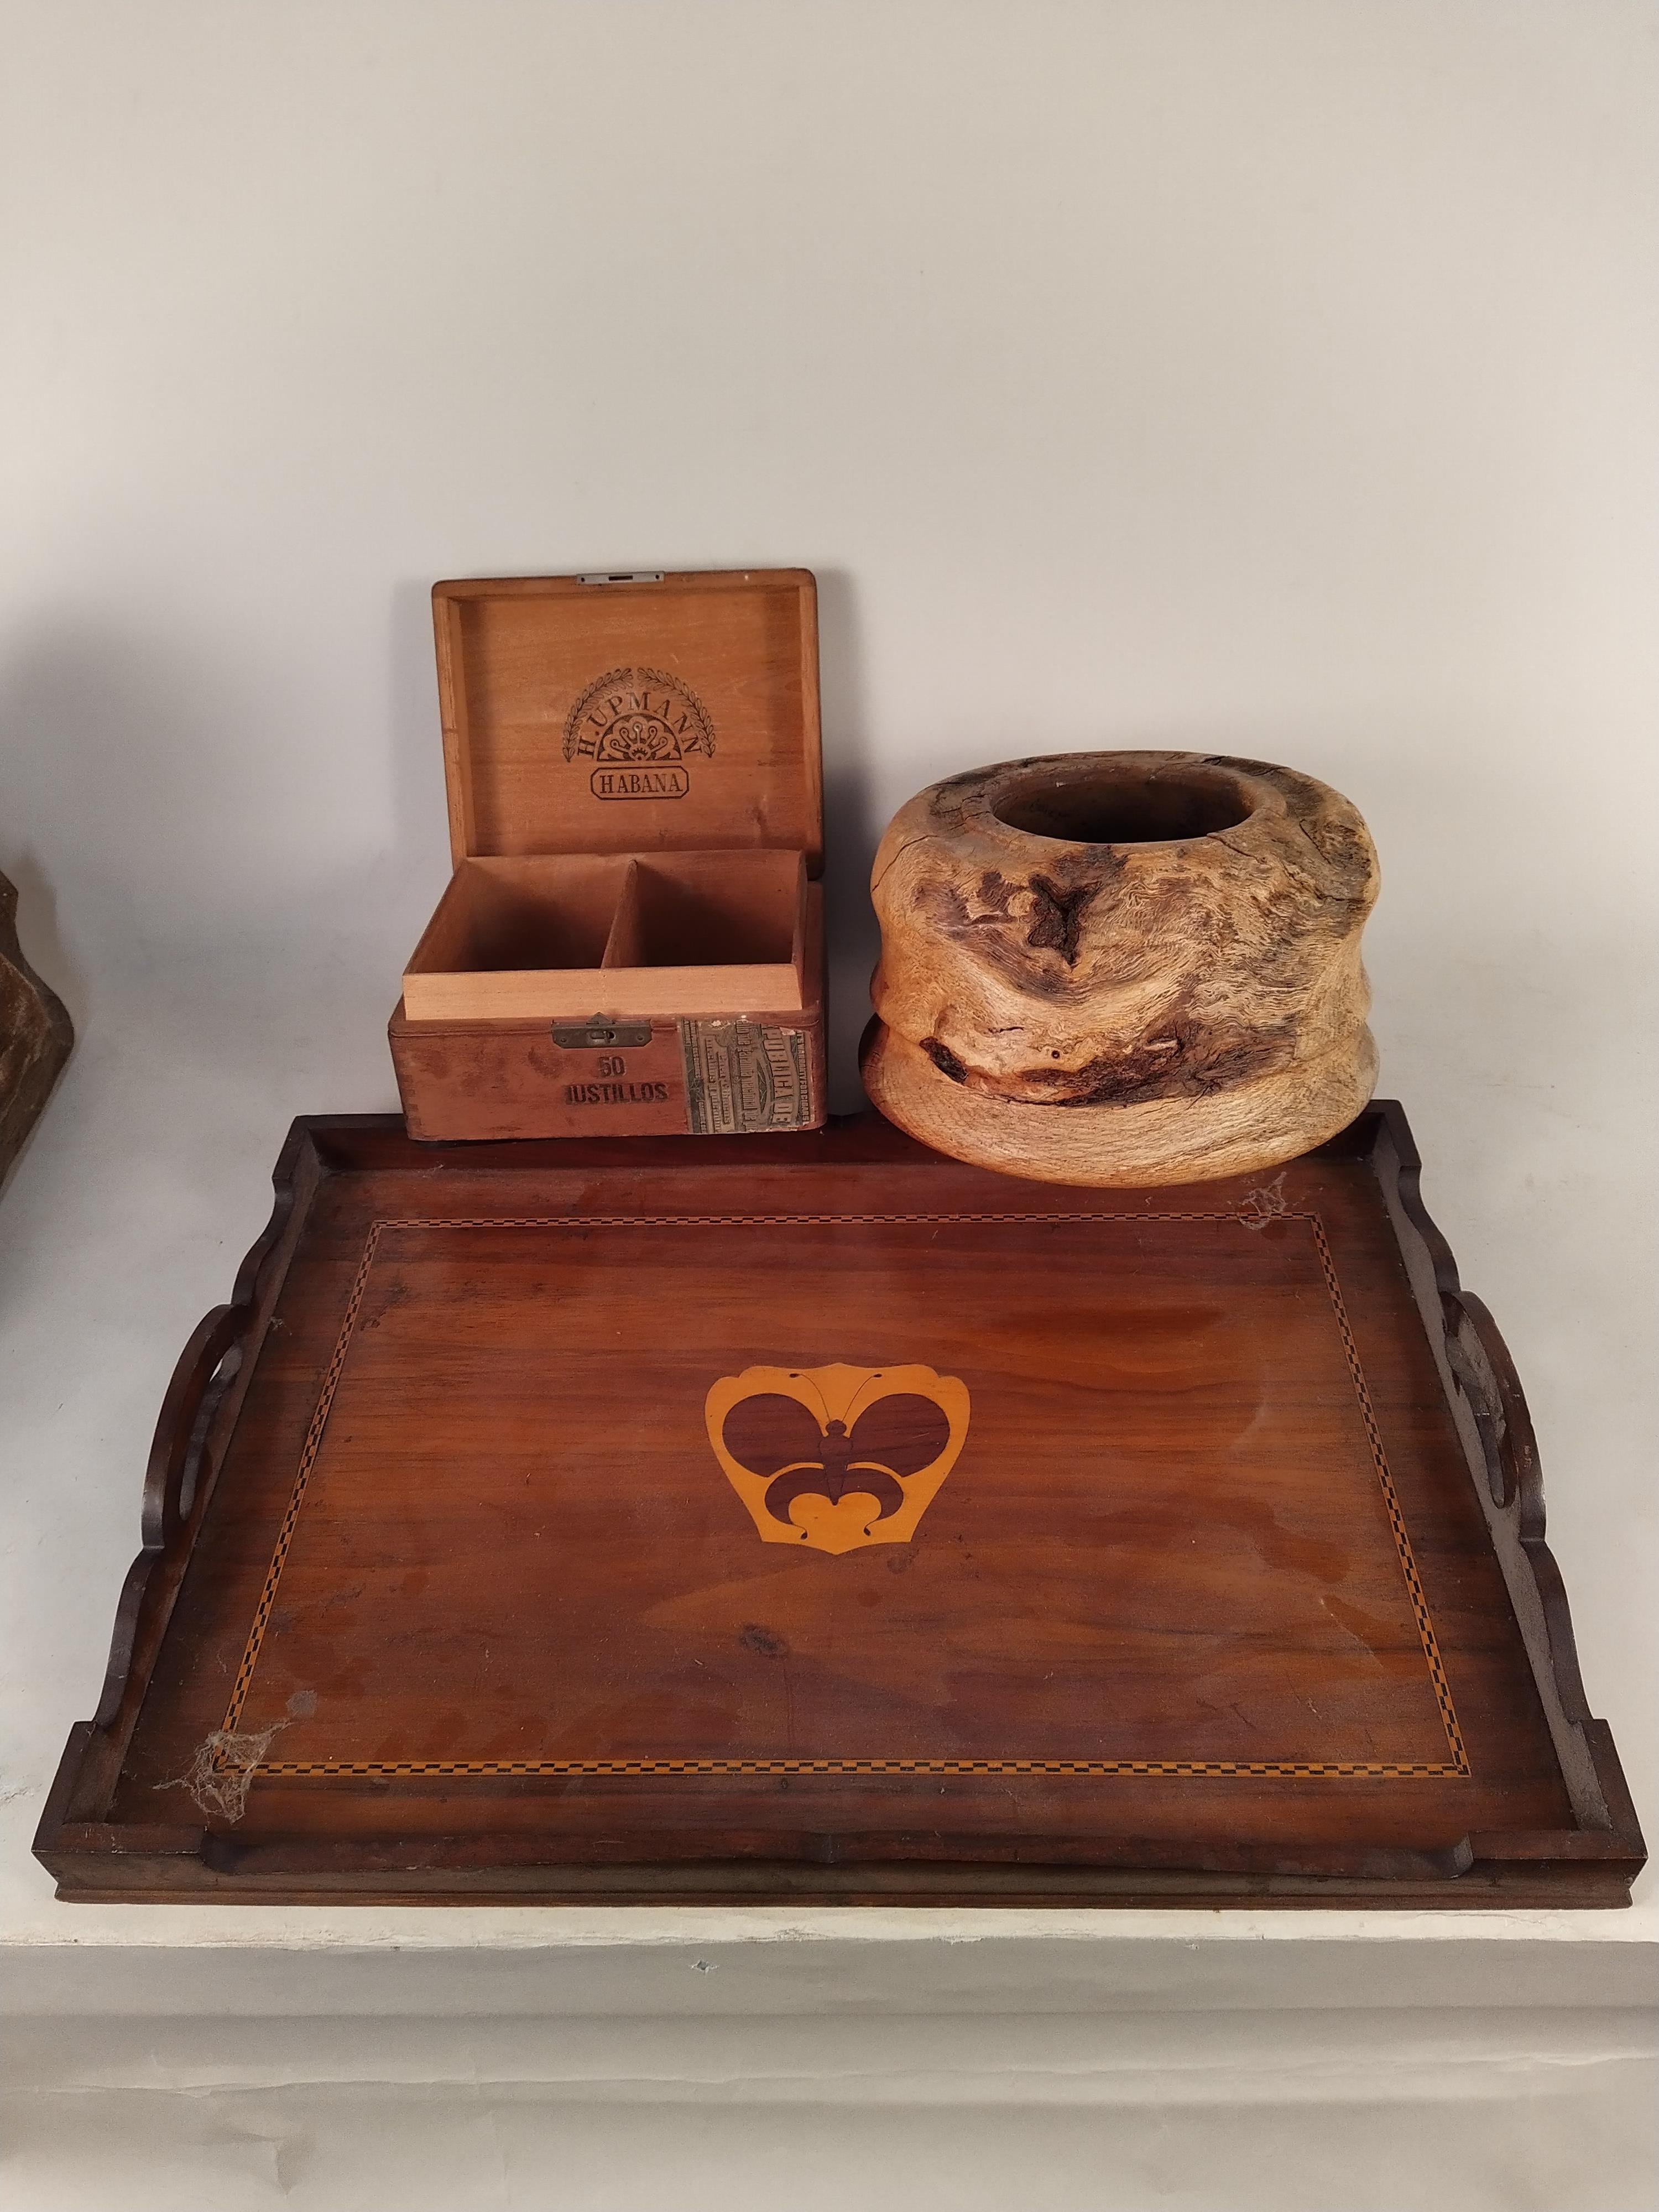 A wooden inlaid tray plus a tea caddy, H Upmann Havana cigar box (no contents), - Image 3 of 3